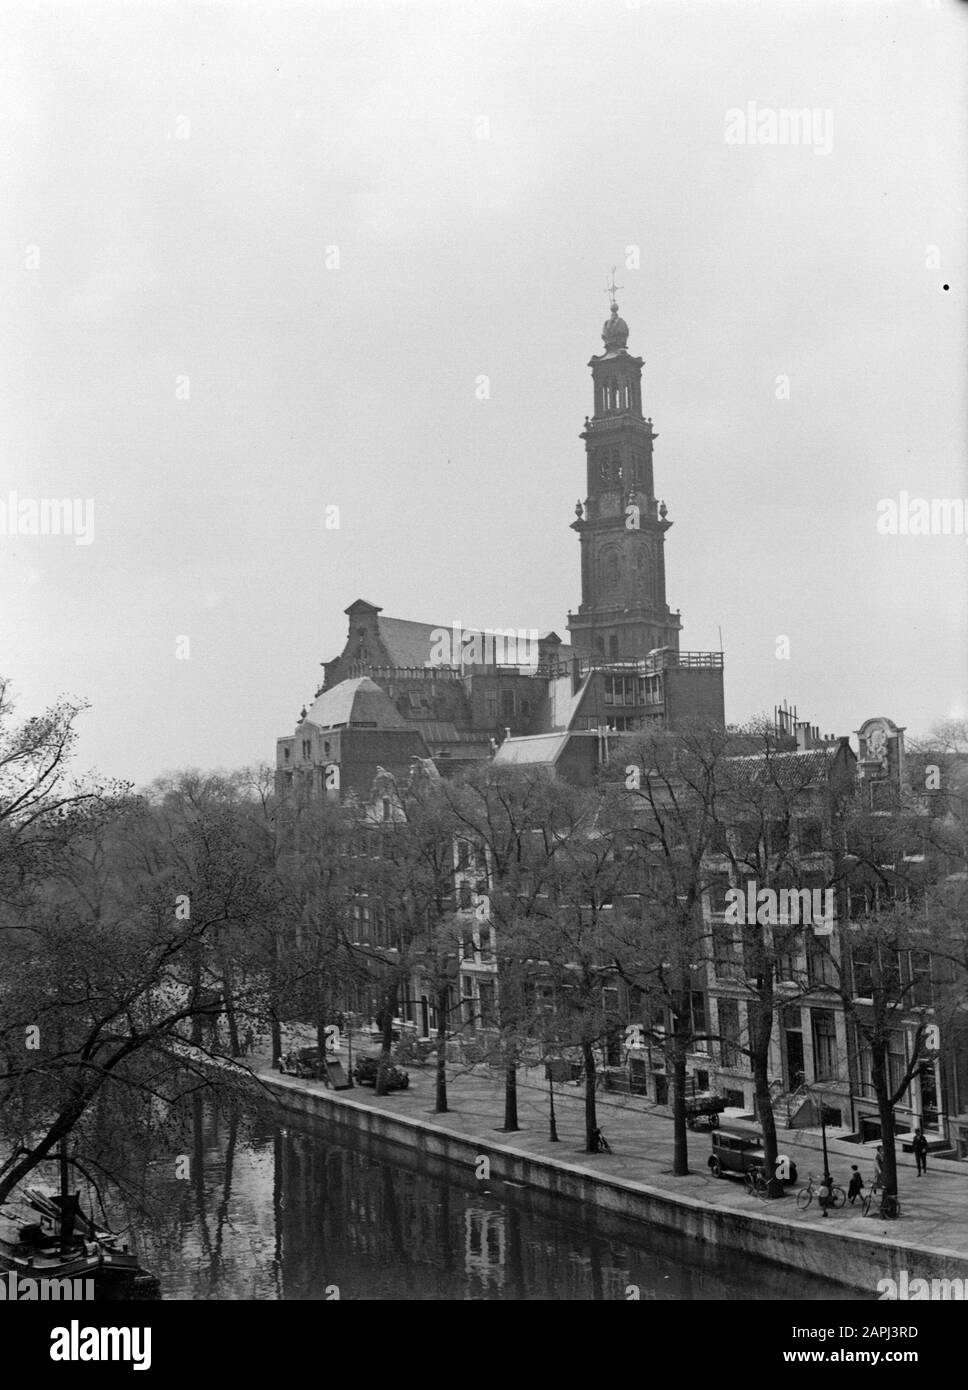 Reportage Amsterdam Description: The Westerkerk in Amsterdam with the Keizersgracht Annotation: Seen from the building of the Eerst Hollandsche Life Insurance Bank at the Keizersgracht Date: 1932 Location: Amsterdam, Noord-Holland Keywords: canals, canal houses, church buildings, city sculptures, towers Institution name: Westertoren Stock Photo